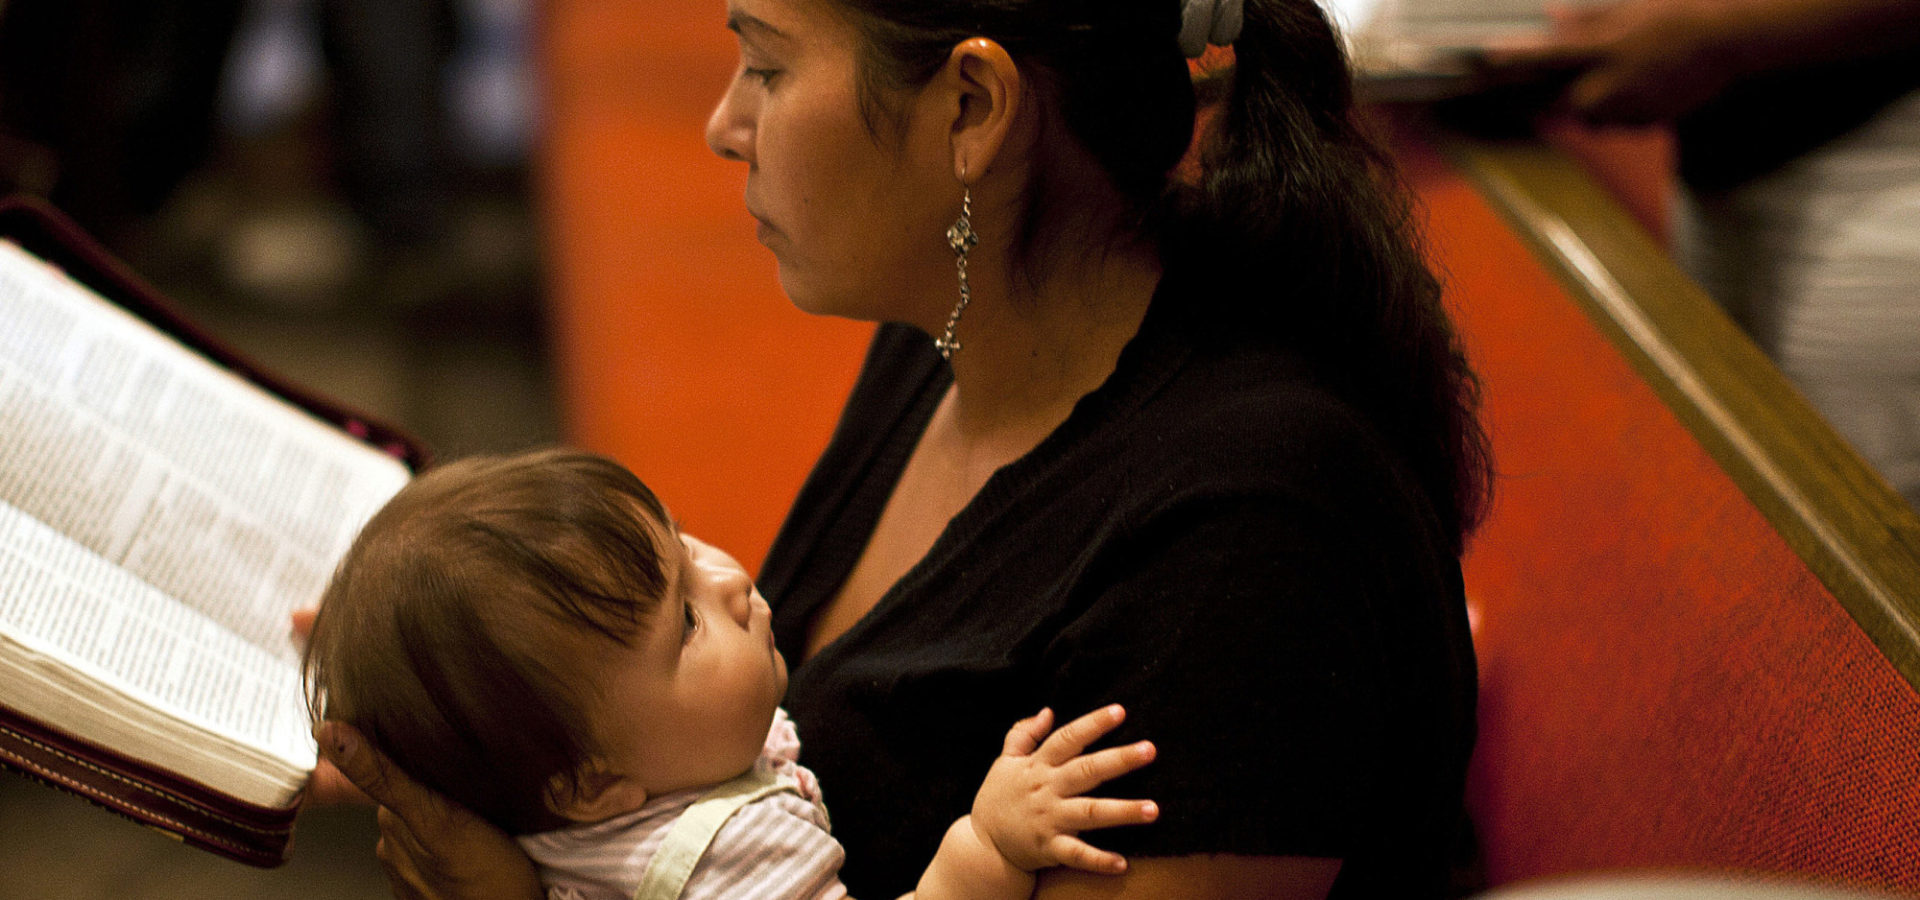 In this photo taken on Aug. 28, 2011, undocumented immigrant Maria Romero, holds her 8-month-old daughter Crista while she reads her Bible during a Disciples of Christ Sunday worship service. (AP/Nick Oza)